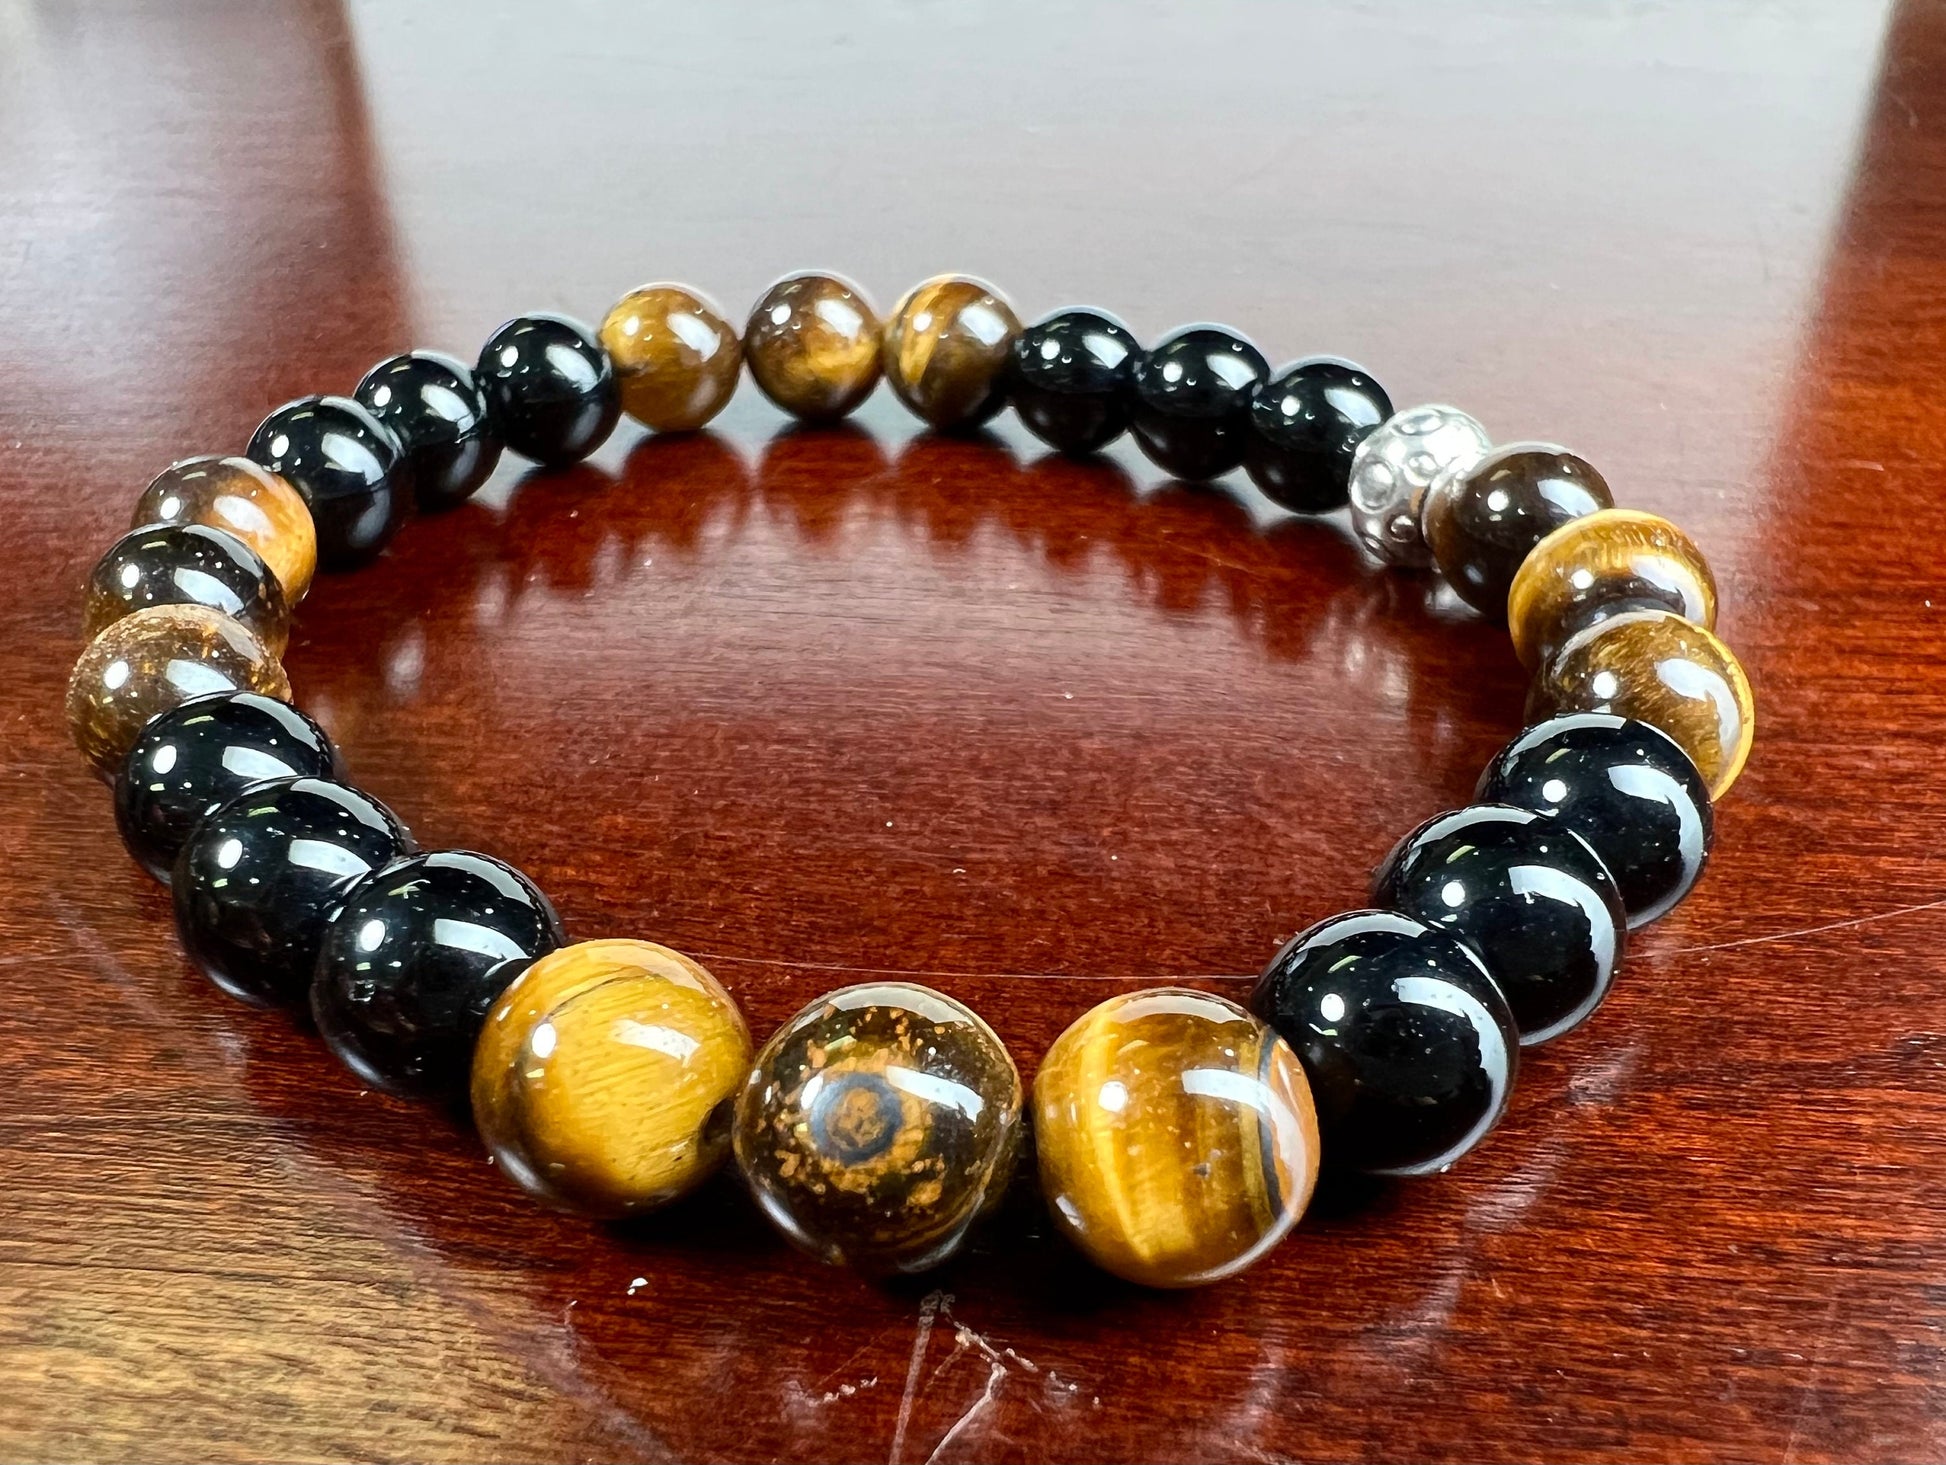 Tiger Eye with brown with Black Onyx 8mm smooth round AAA quality beaded Crystal Stretchy Bracelet. Man’s gift